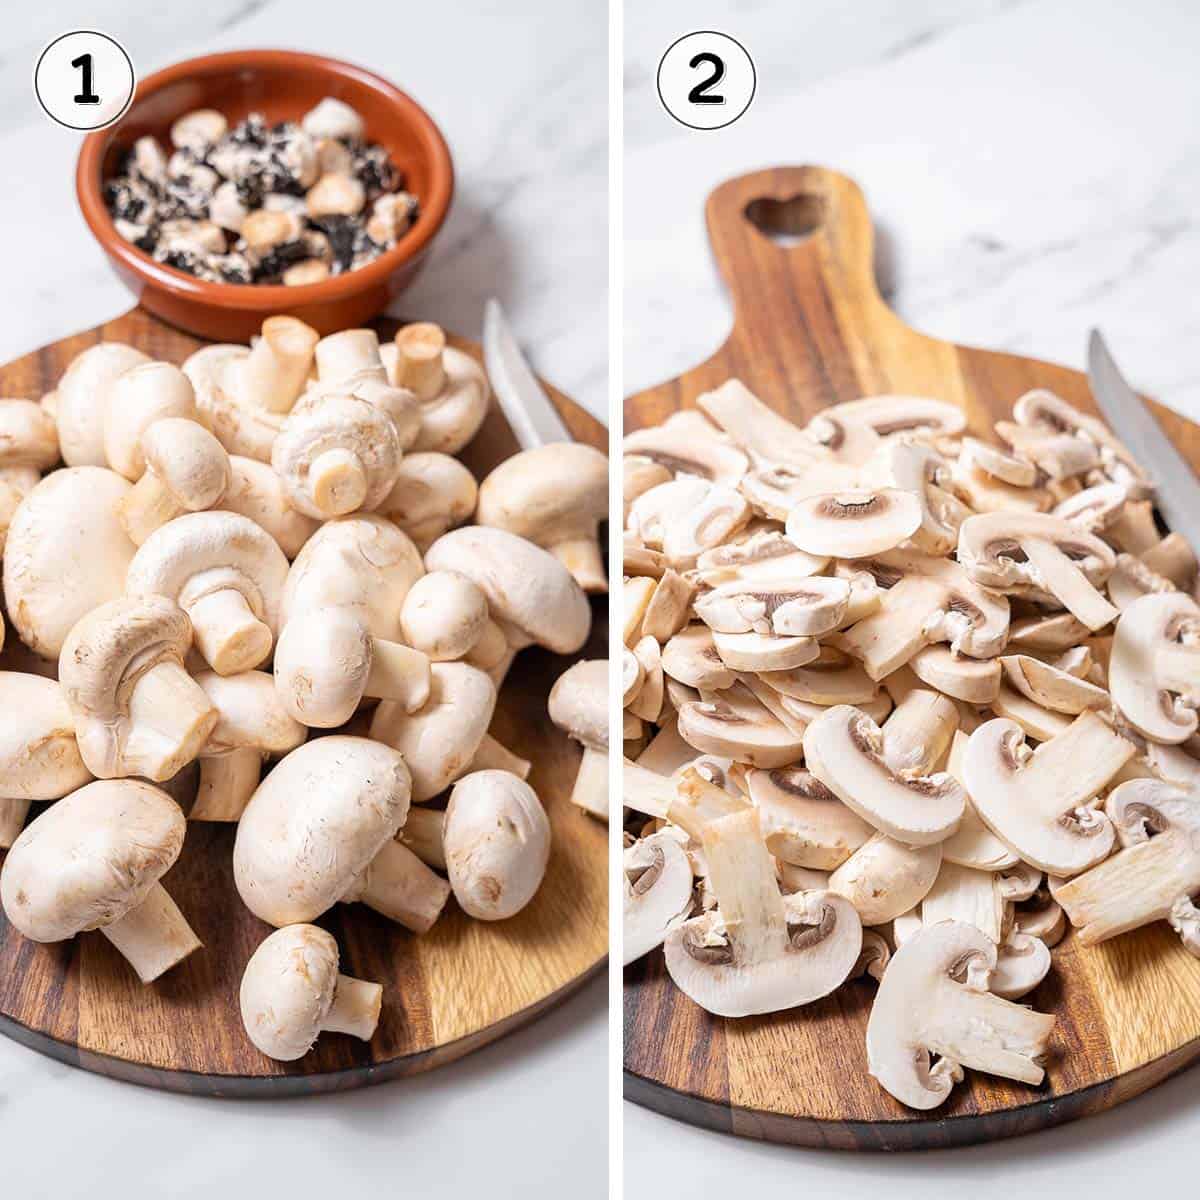 white button mushrooms before and after slicing.